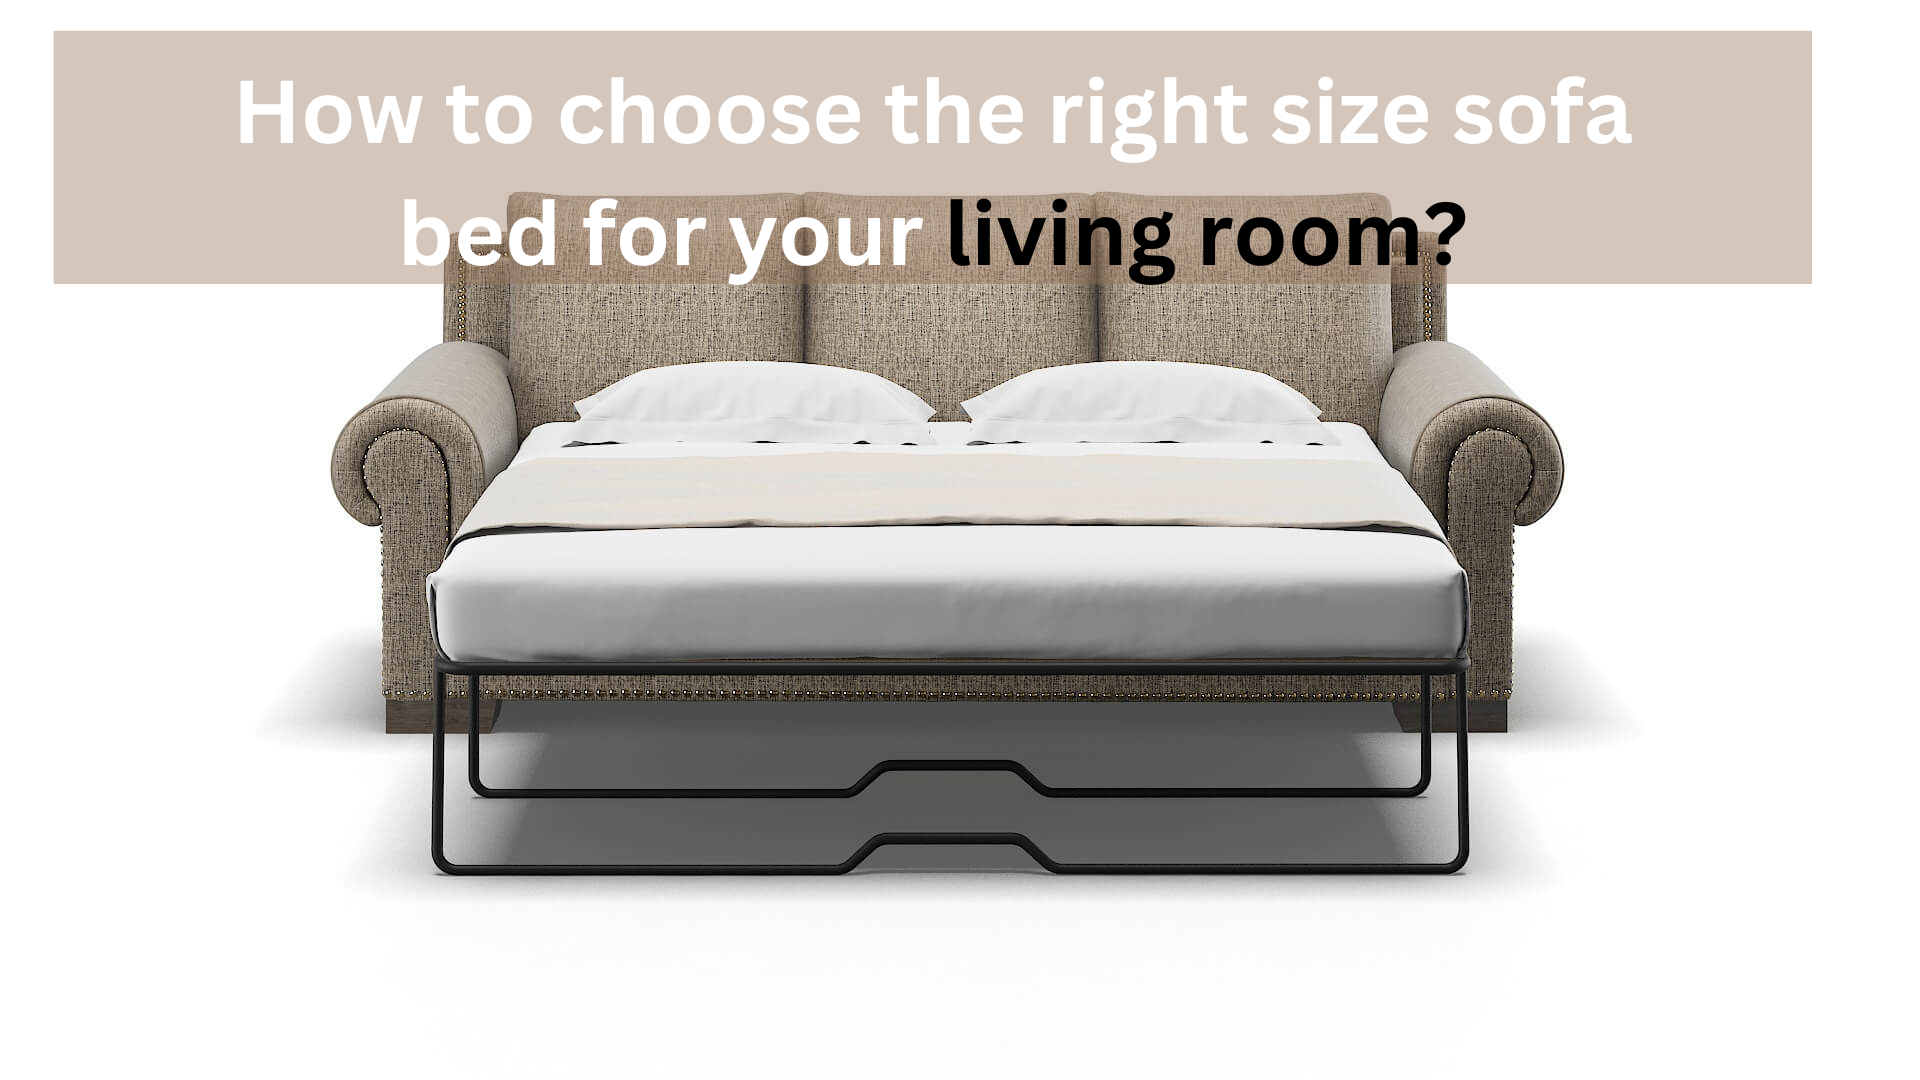 How to choose the right size sofa bed for your living room?